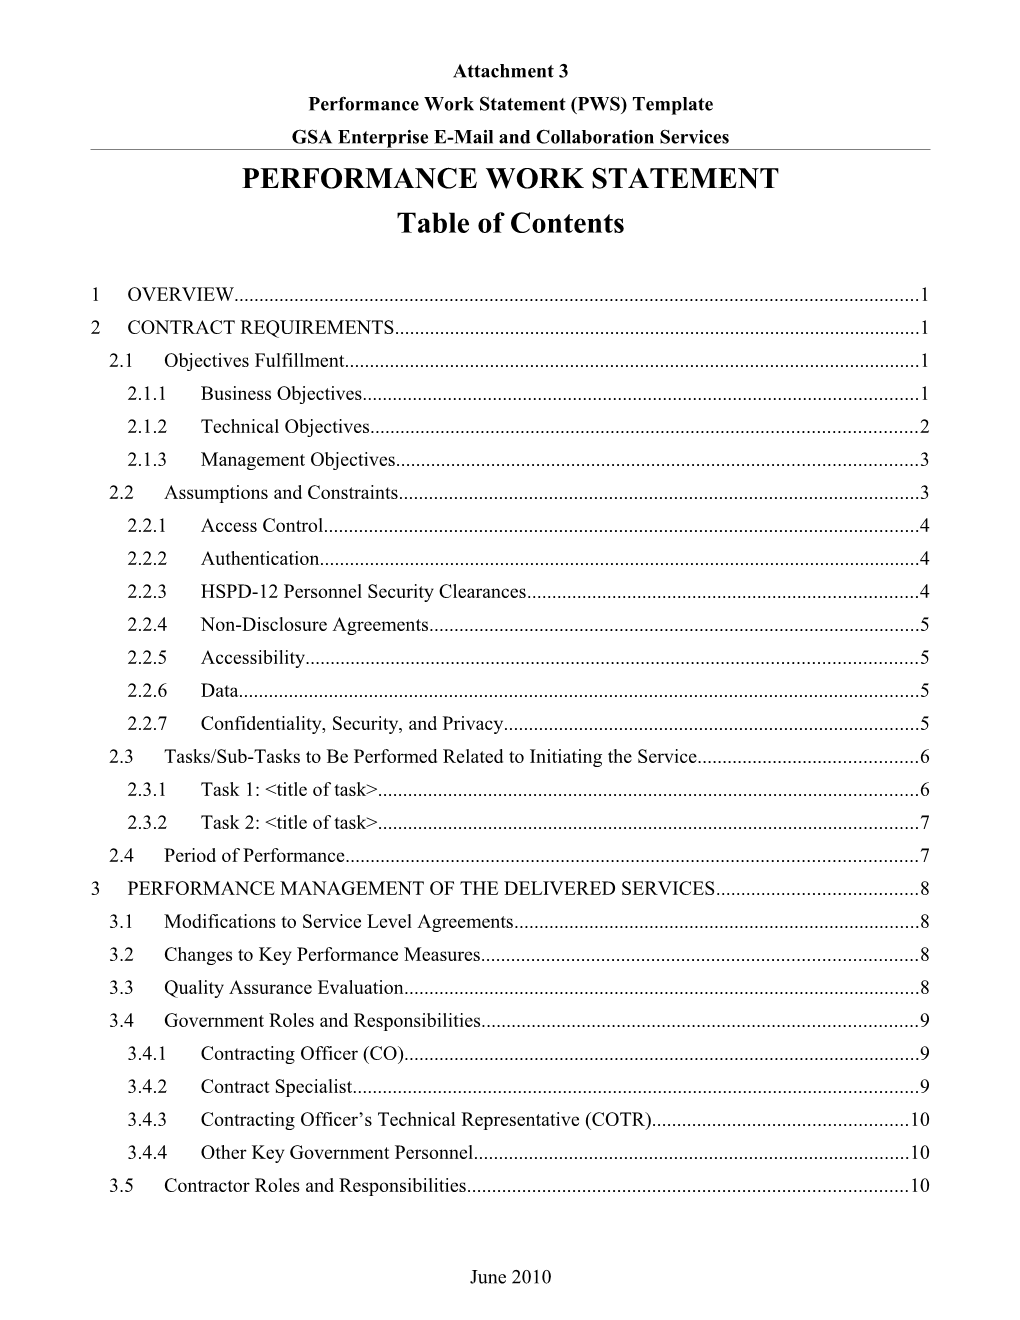 Performance Work Statement (PWS) Template